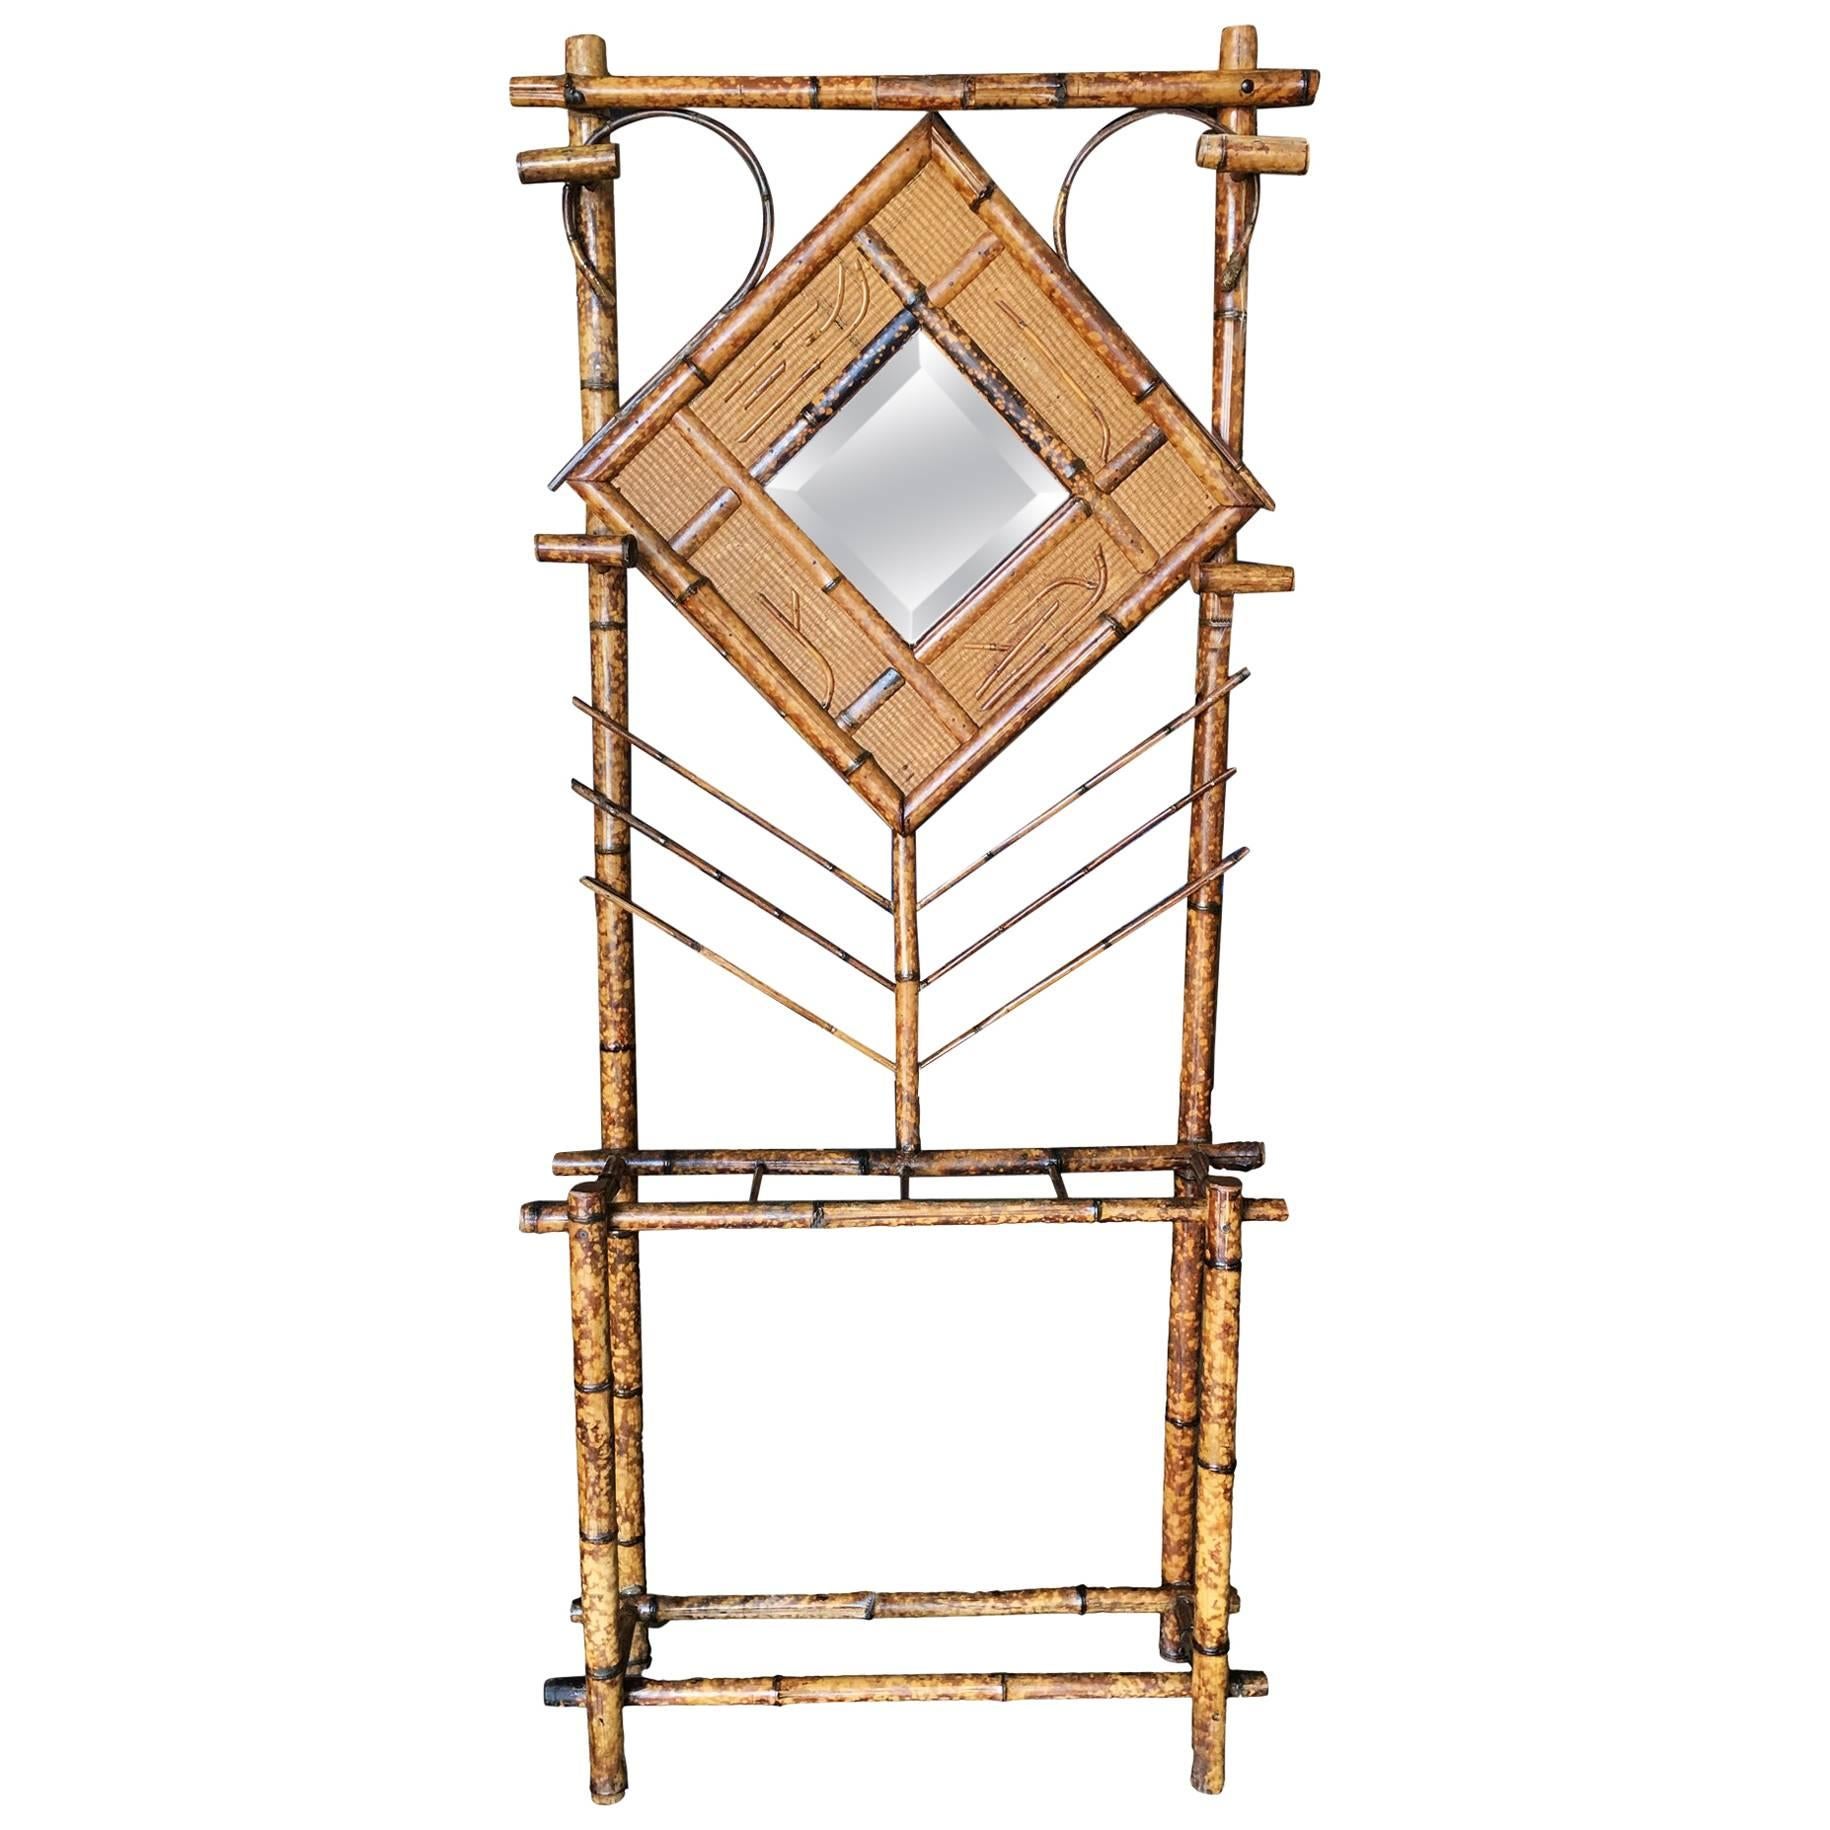 Restored Tiger Bamboo Coat Rack Hall Tree with Mirror, Aesthetic Movement